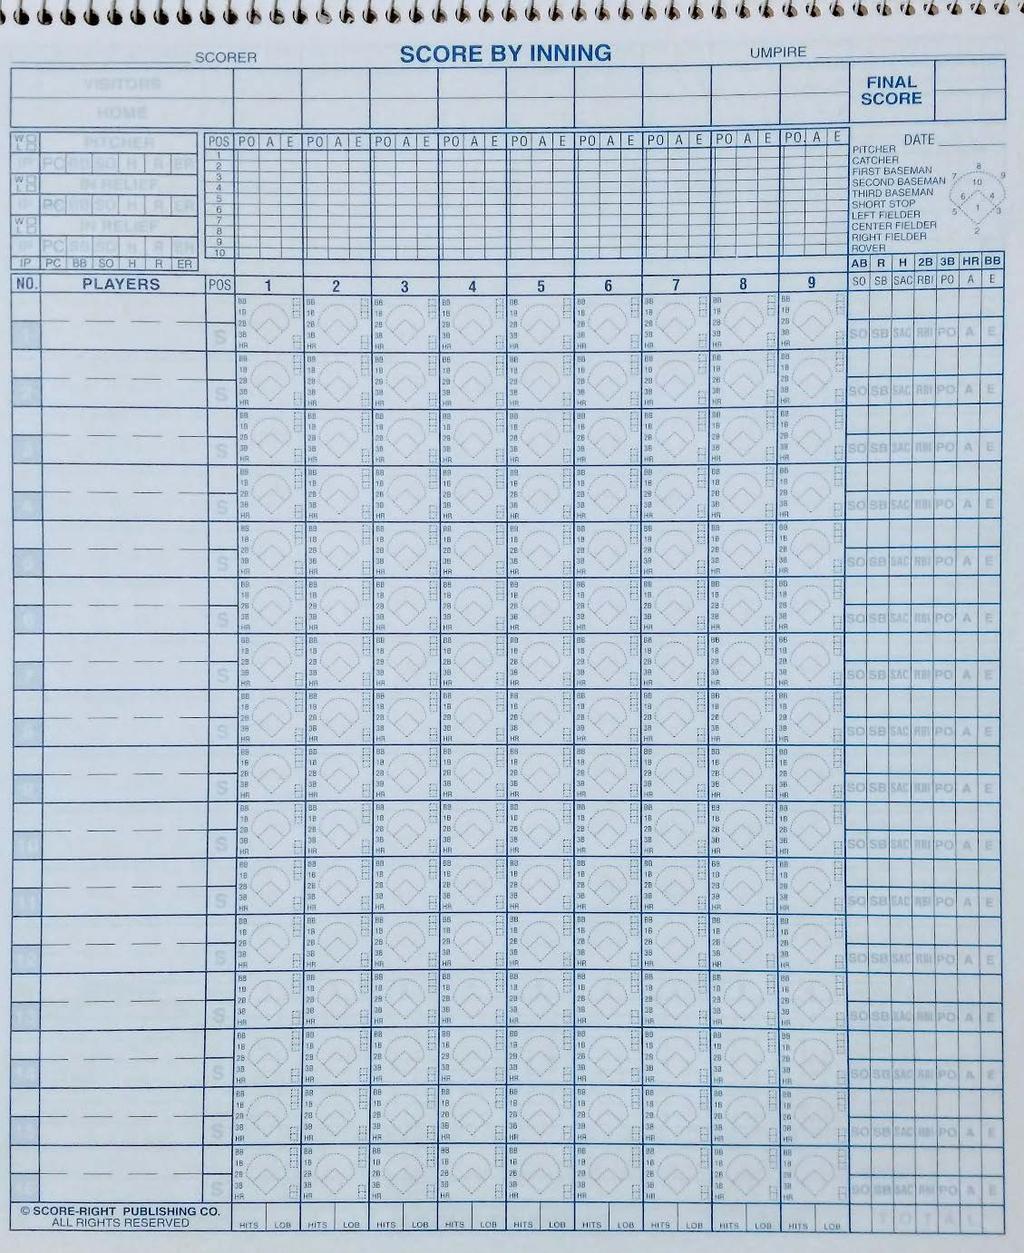 The Scorebook INTRODUCTION: This is what a page of the scorebook looks like. There are a lot of abbreviations and spaces to collect every action that occurs on the field during play.